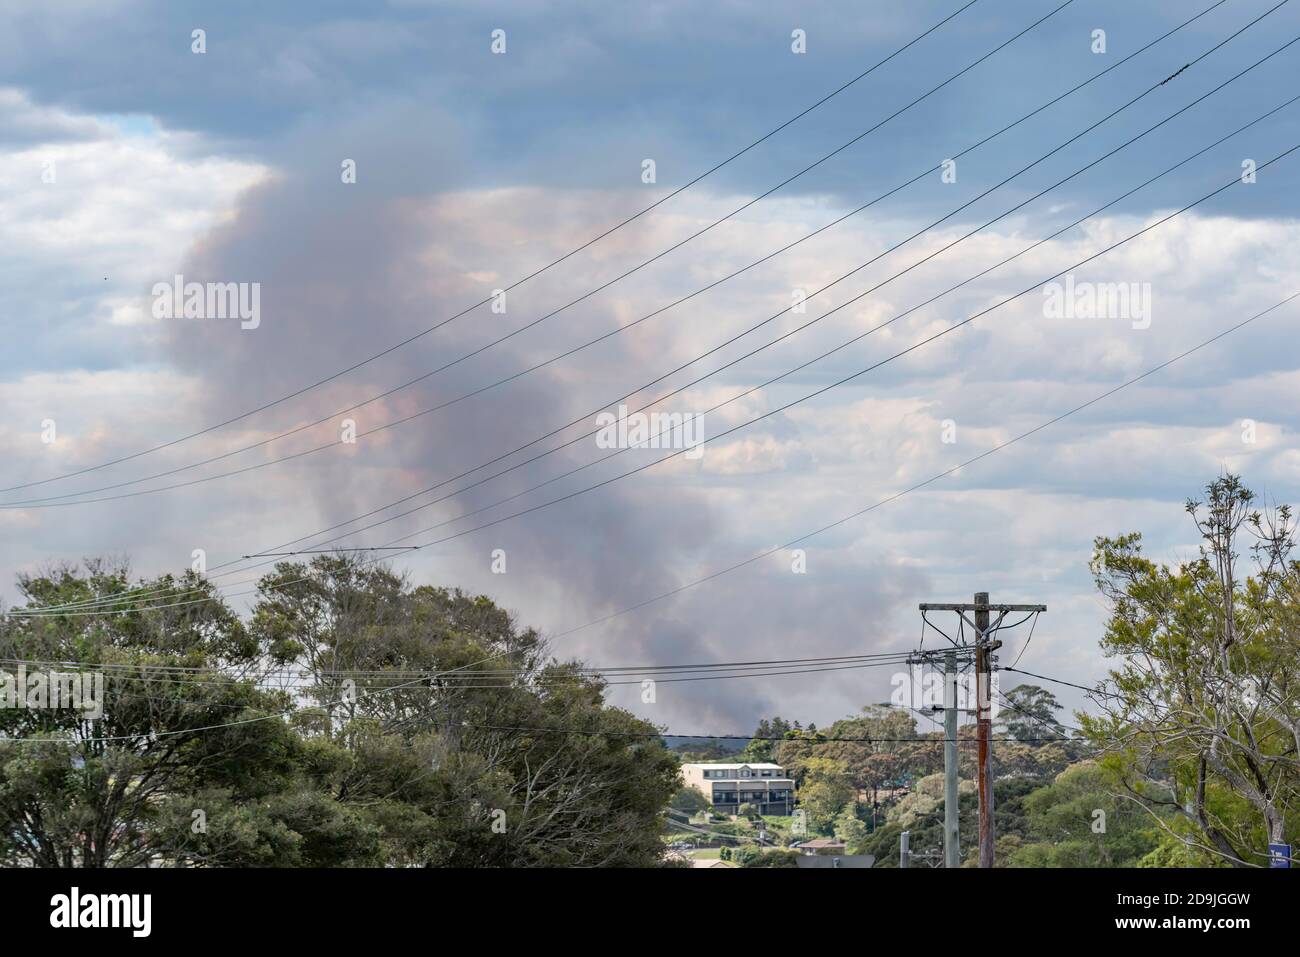 Heathcote National Park Sydney, Aust. Oct 2020: An out of control Hazard Reduction Burn in the park seen from the nearby suburb of Helensburgh, Sydney Stock Photo